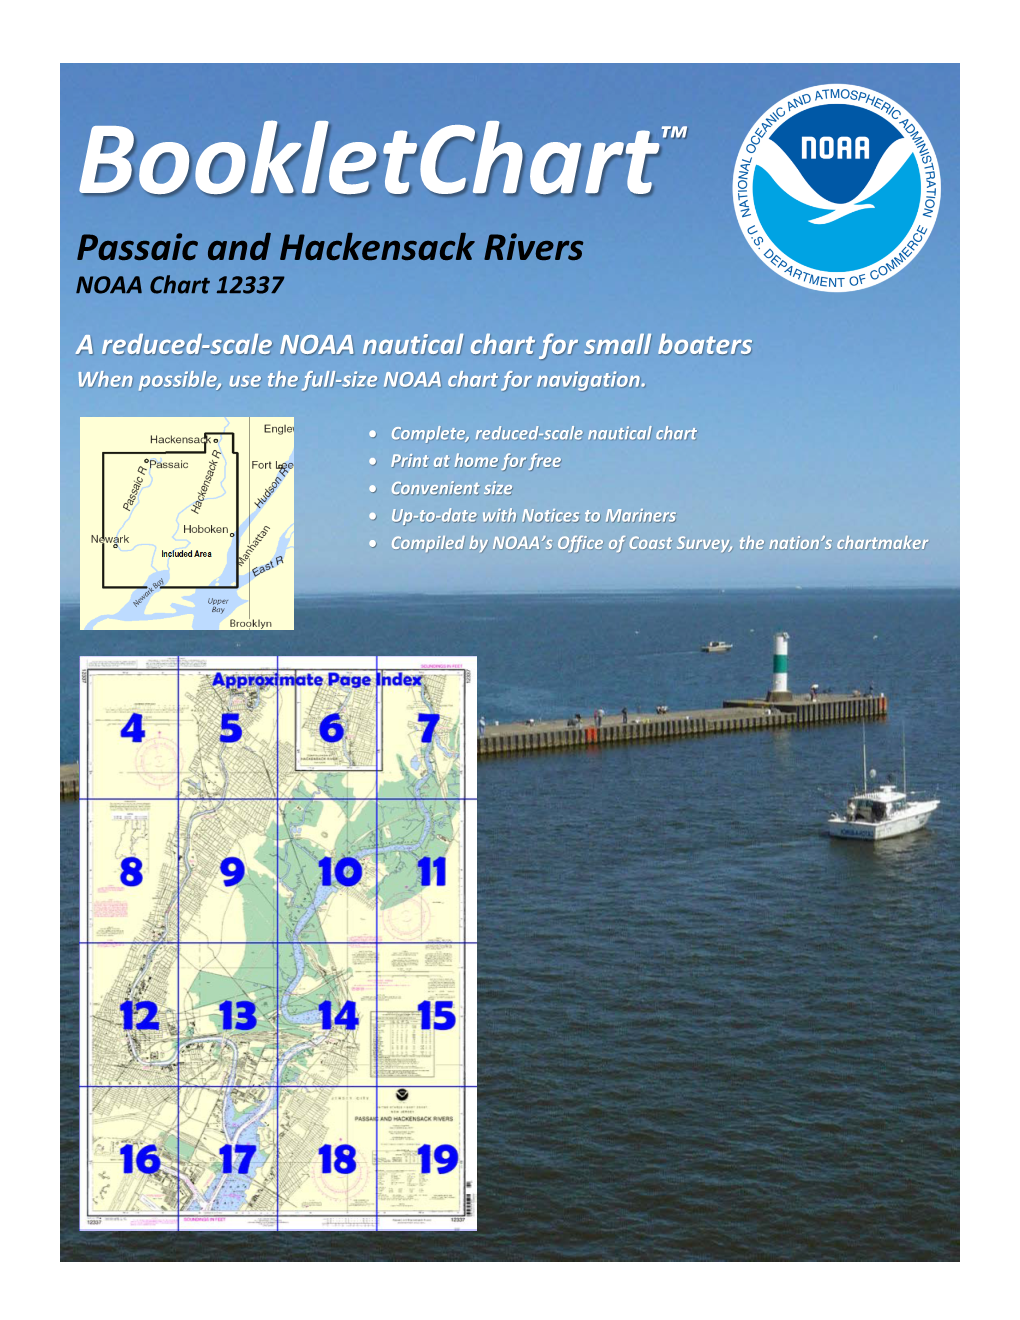 Bookletchart™ Passaic and Hackensack Rivers NOAA Chart 12337 a Reduced-Scale NOAA Nautical Chart for Small Boaters